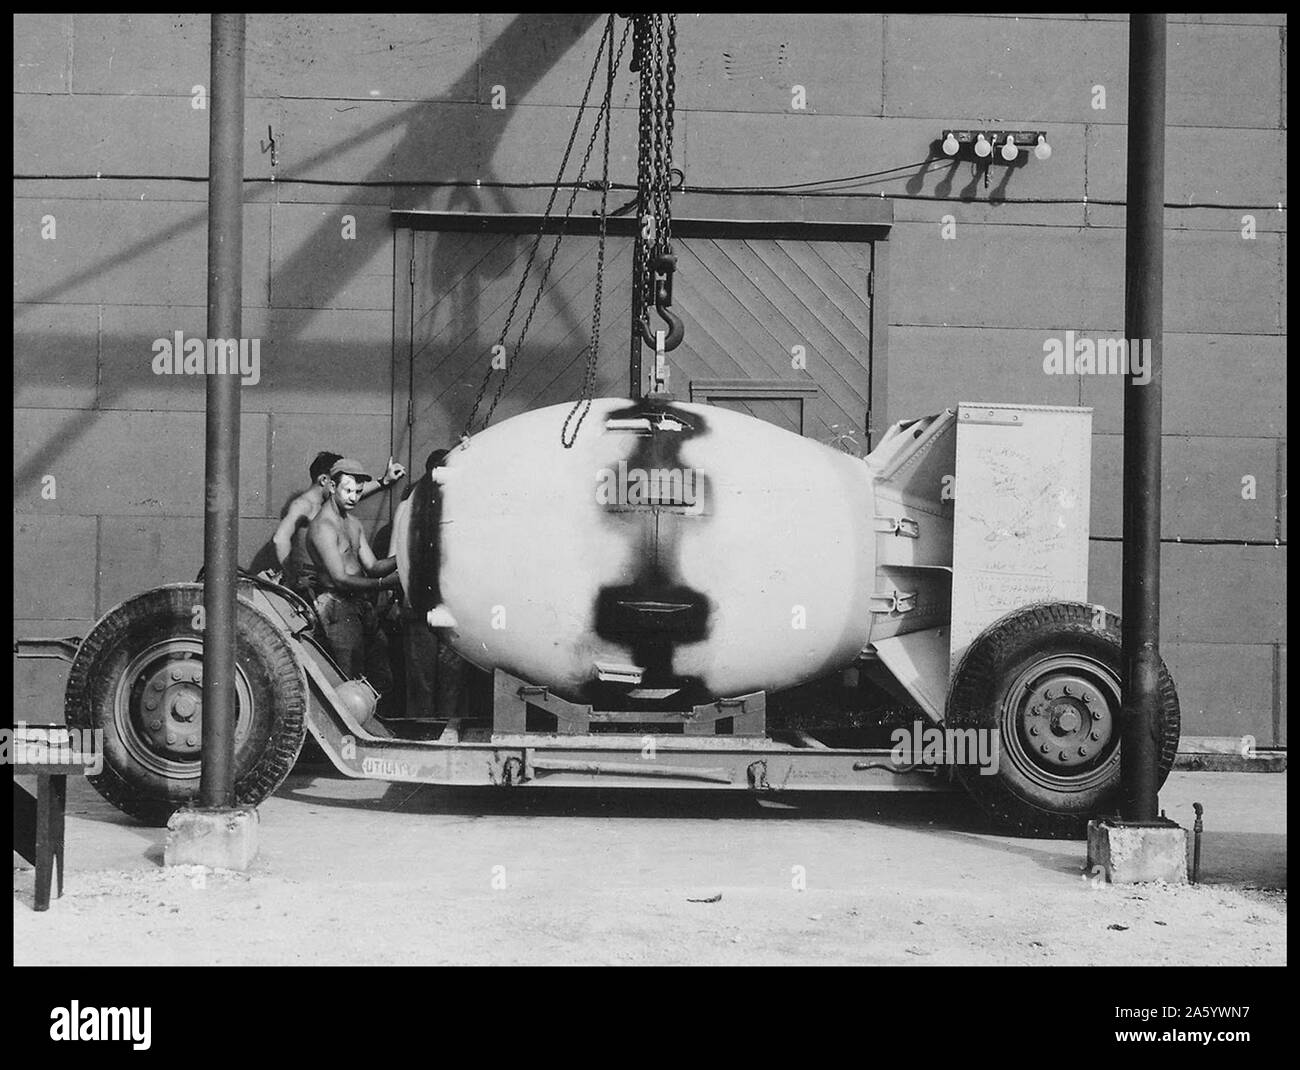 Fat Man on transport carriage, Tinian Island, 1945 'Fat Man' was the codename for the type of atomic bomb that was detonated over the Japanese city of Nagasaki by the United States on 9 August 1945. Stock Photo